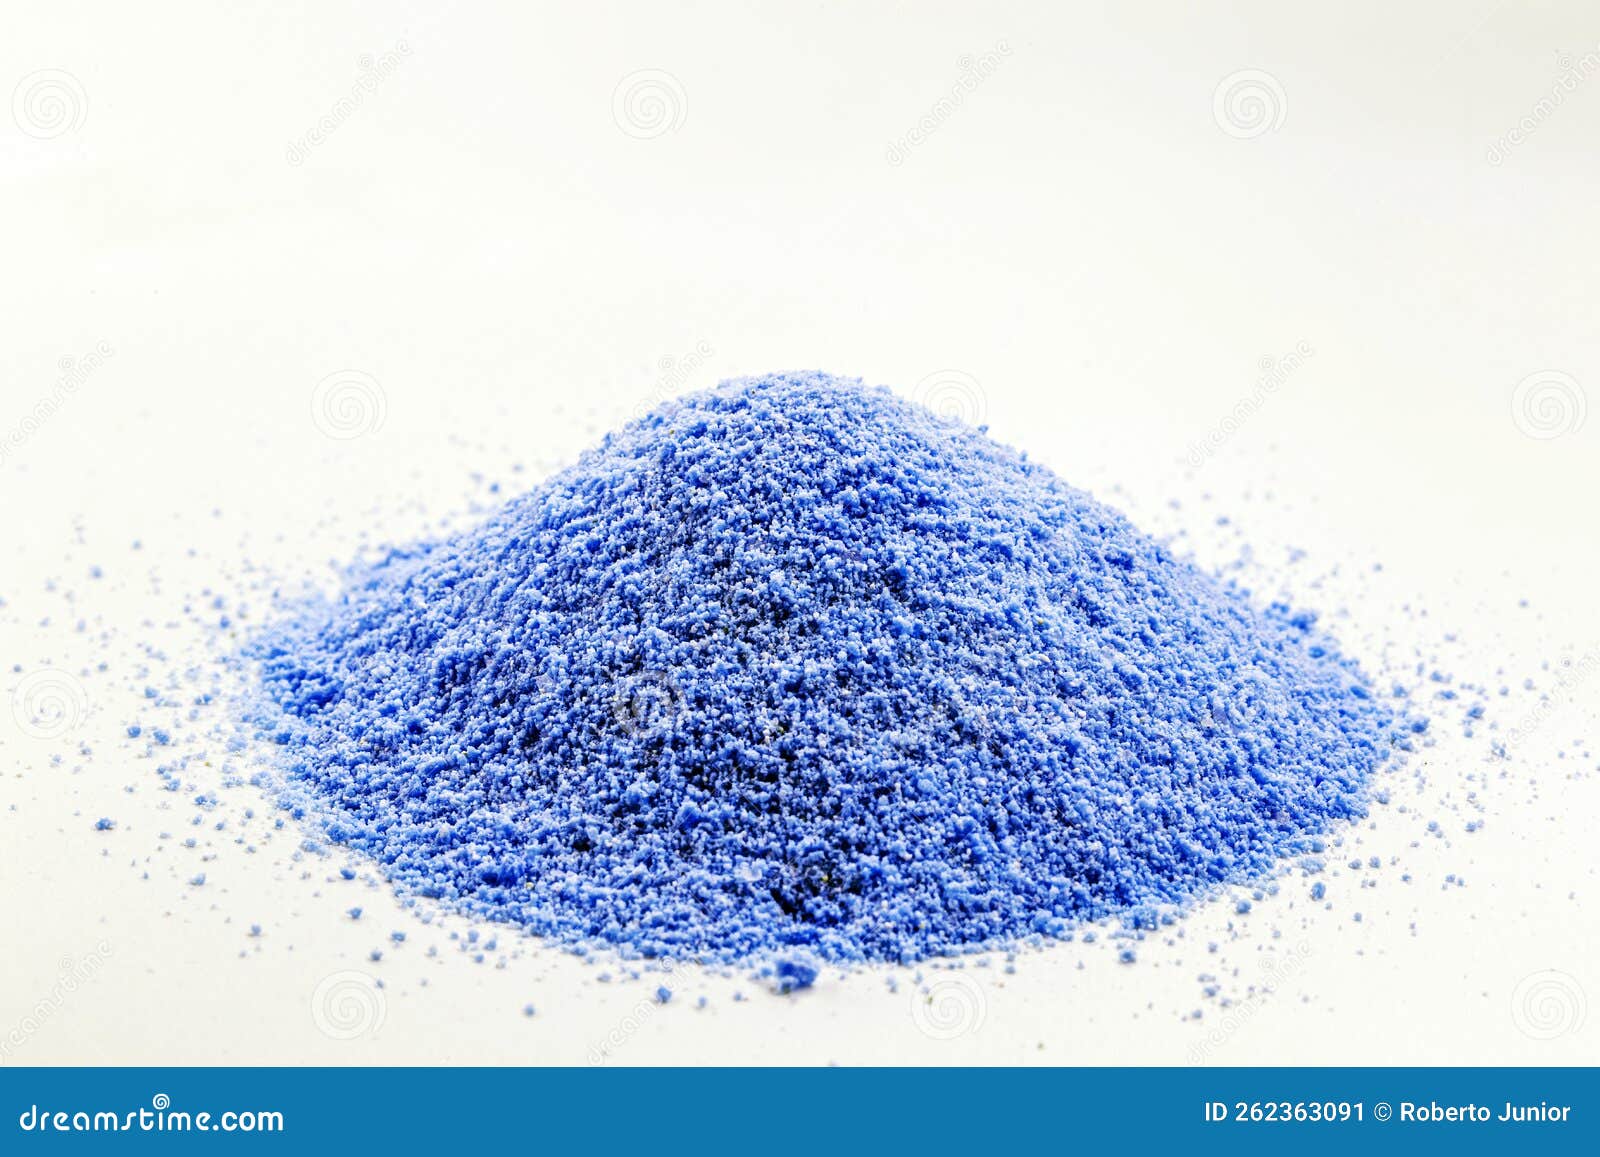 blue fluorescent pigments, made up of a polymeric matrix, resins of different types such as polyester, alkyd, formaldehyde which